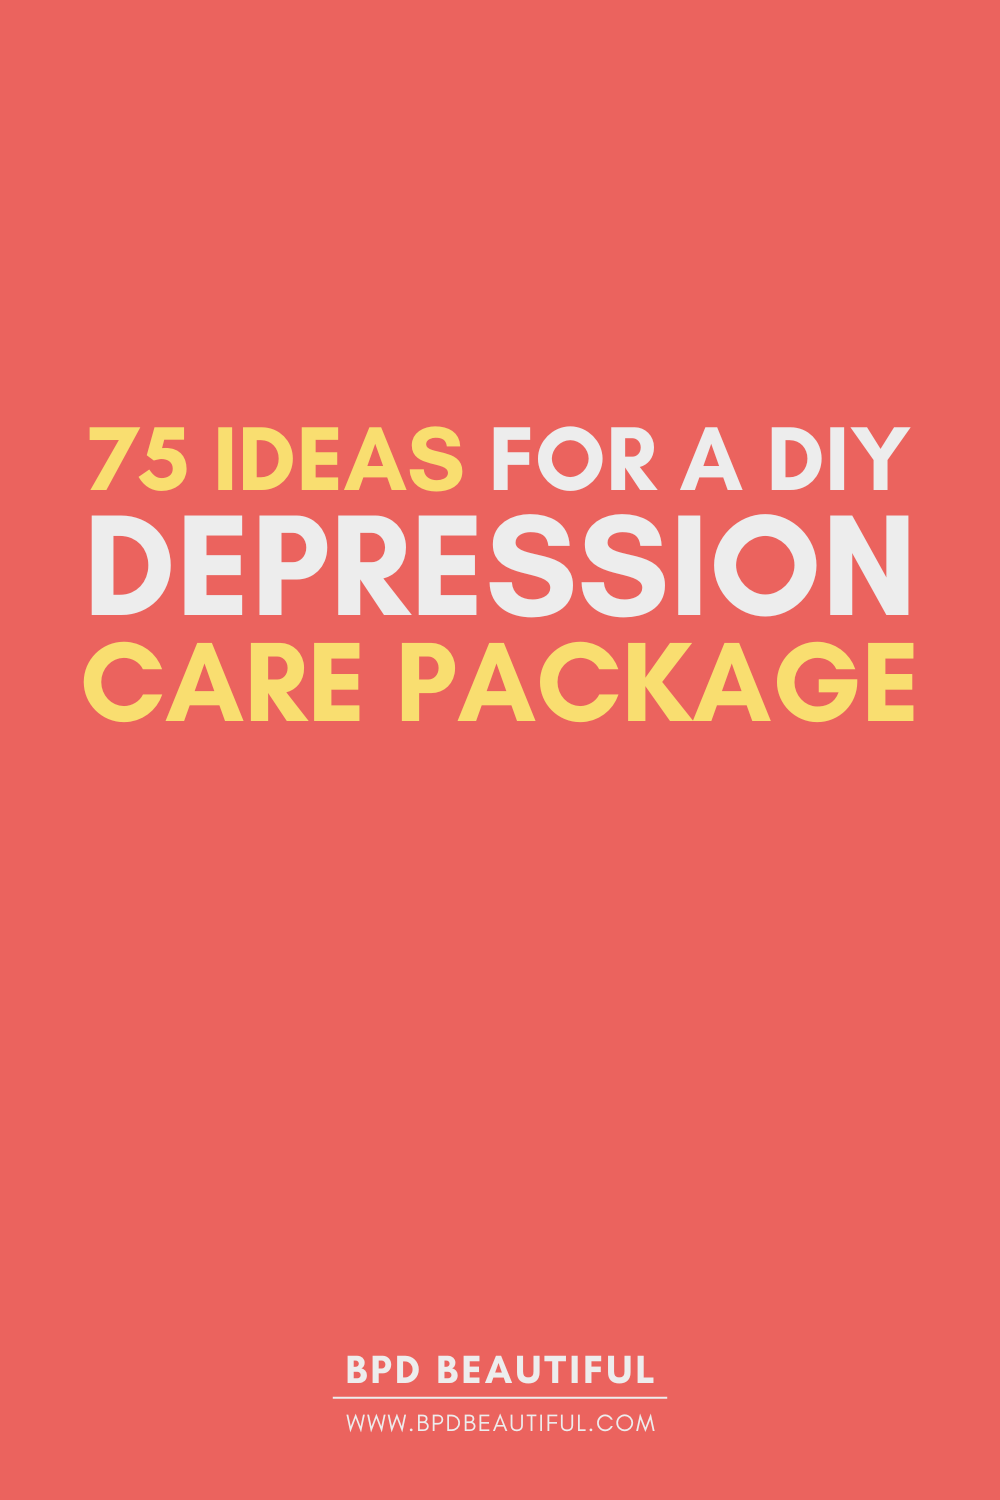 depression care package for someone with depression self care packages for depression depression cant shower